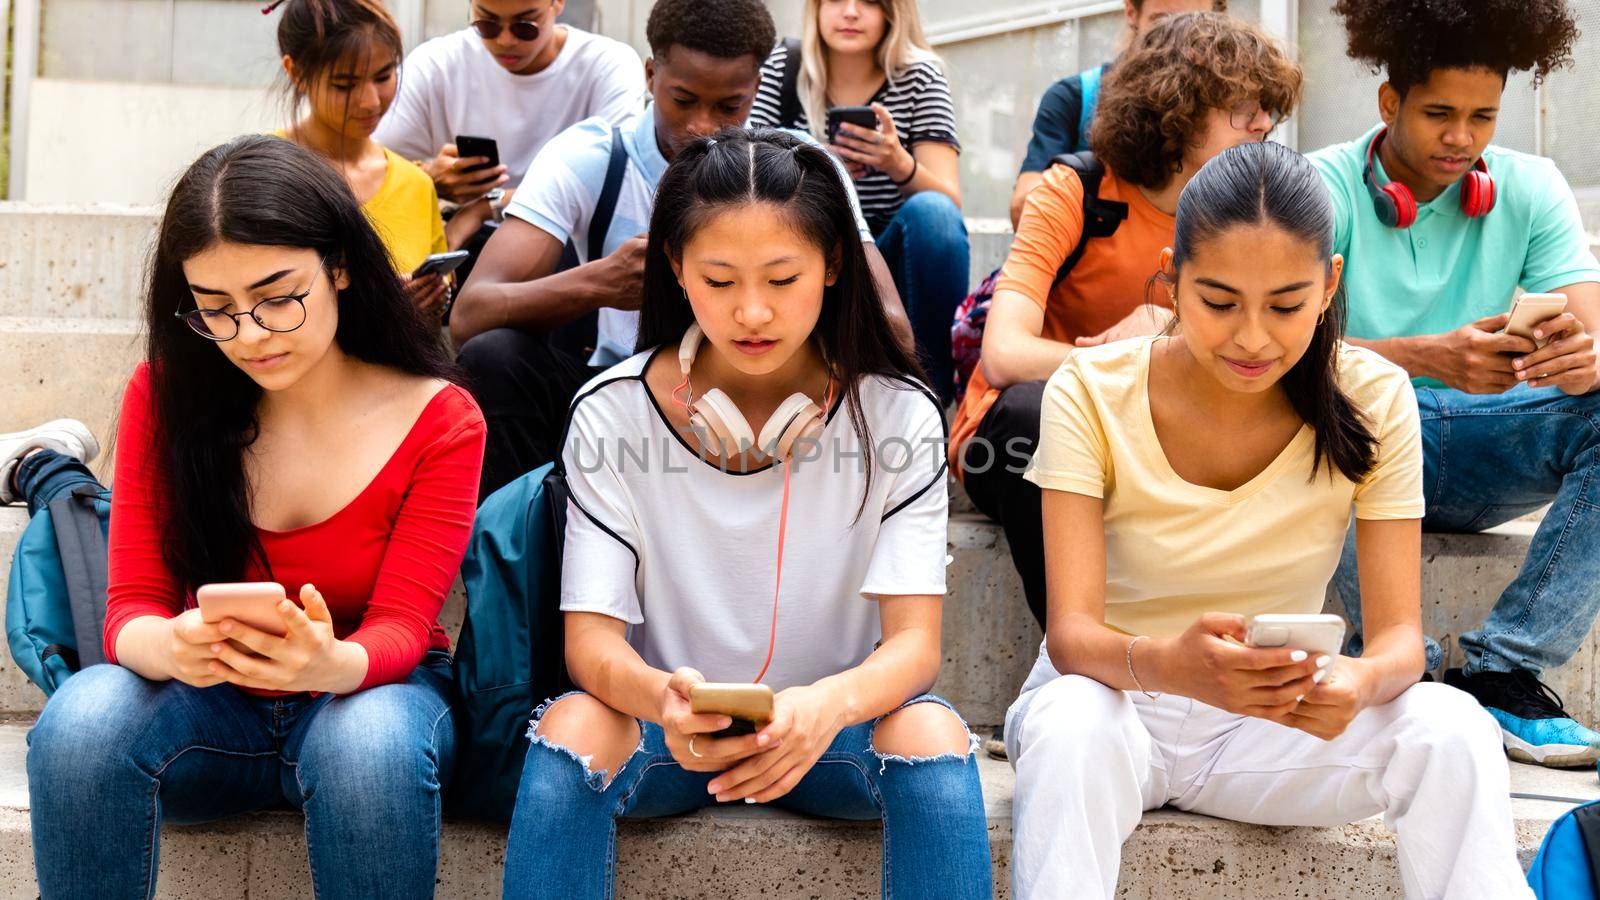 Group of multiracial high school students using mobile phone ignoring each other. Addicted to social media. Cellphone addiction and technology concept.